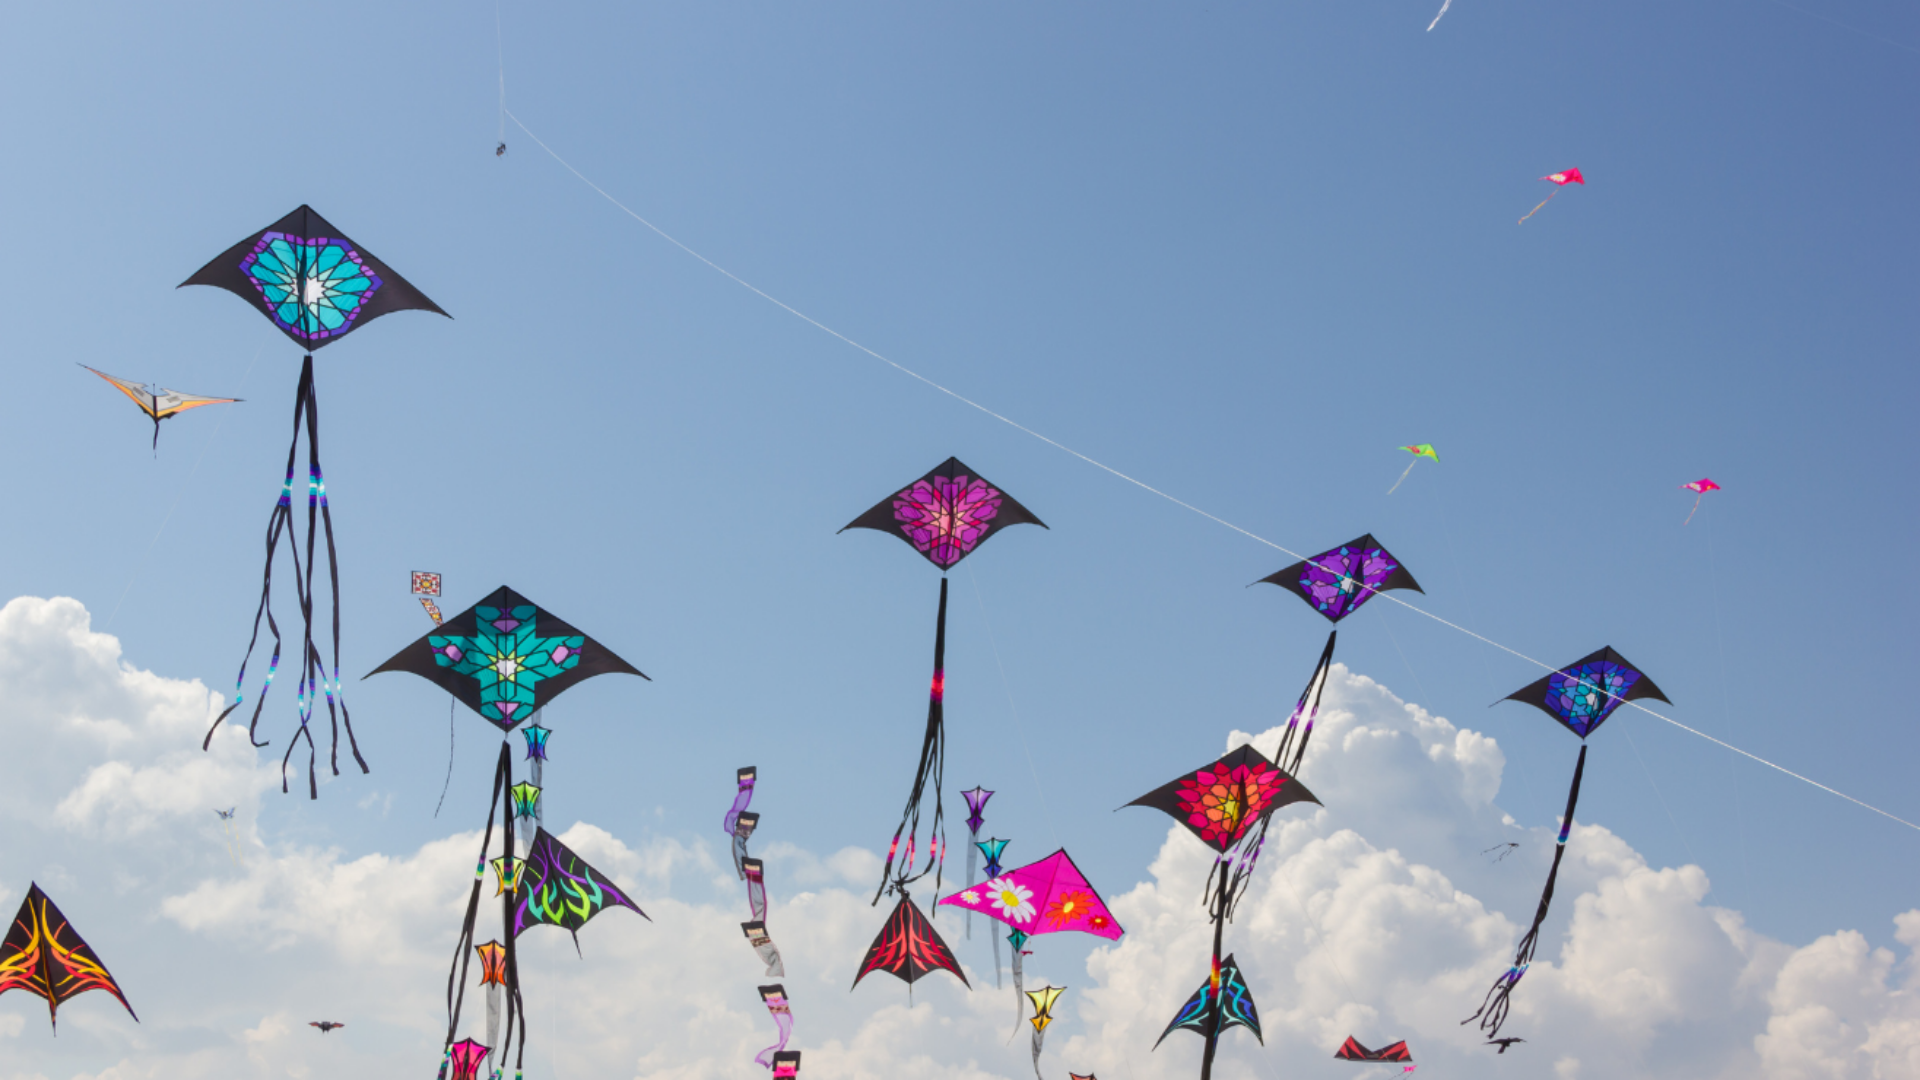 Branded Kites, The ultimate outdoor reusable item!